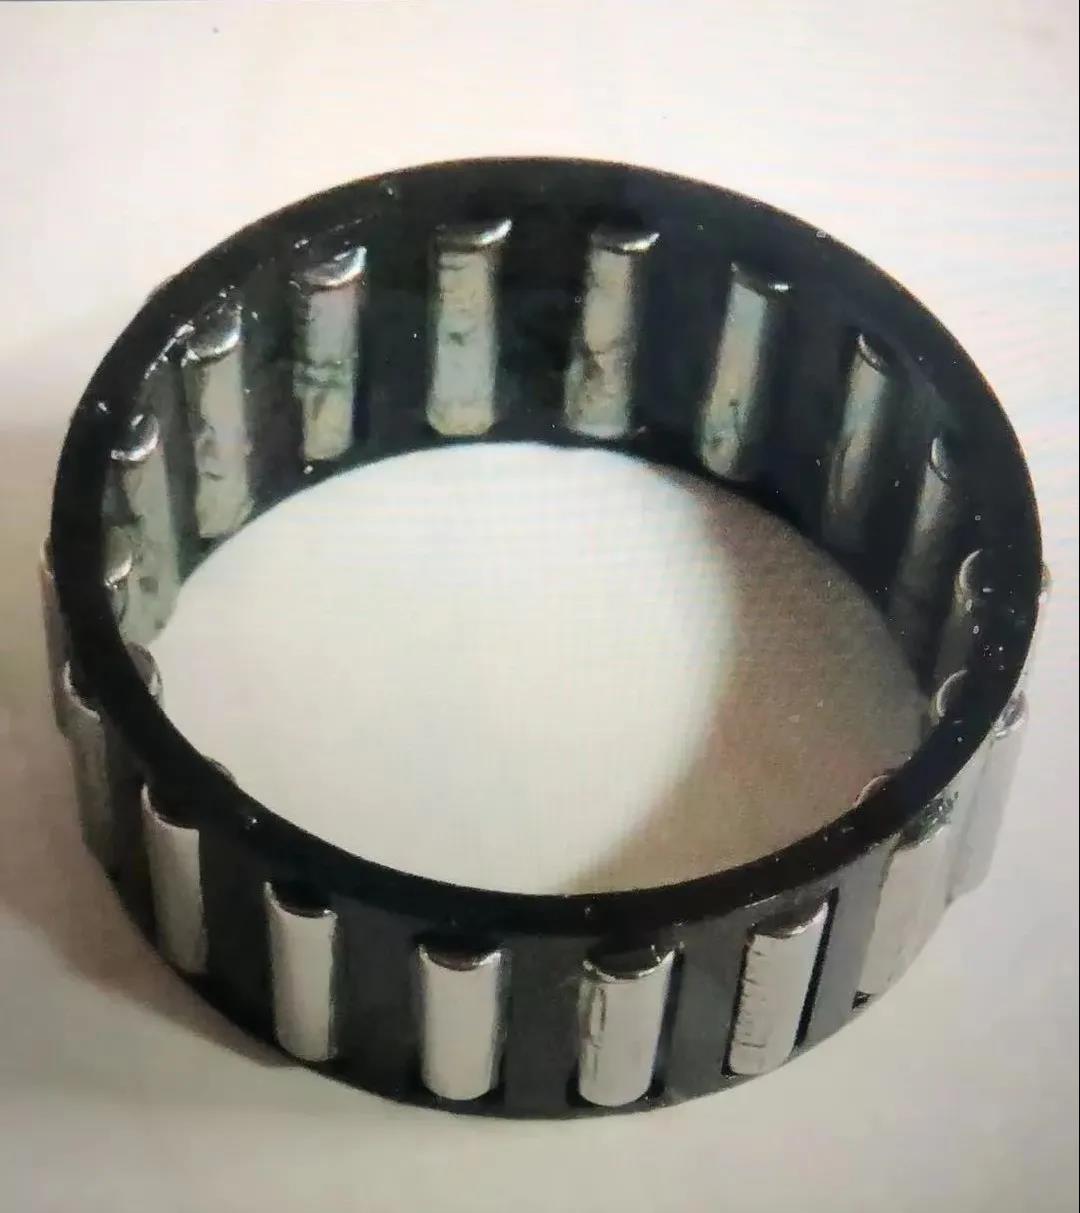 Introduction to needle roller bearings